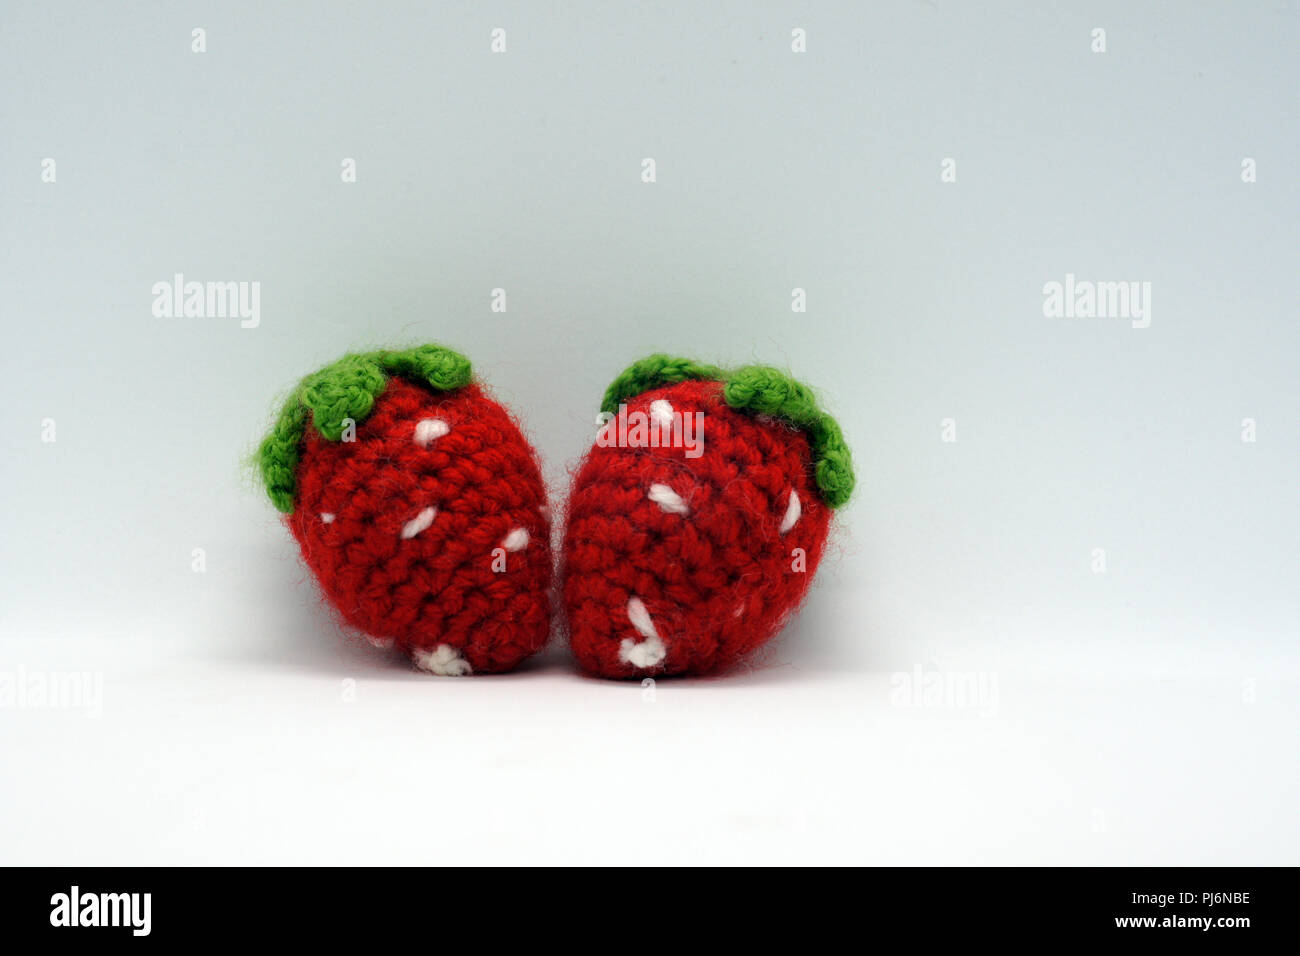 two red crocheted strawberrys Stock Photo